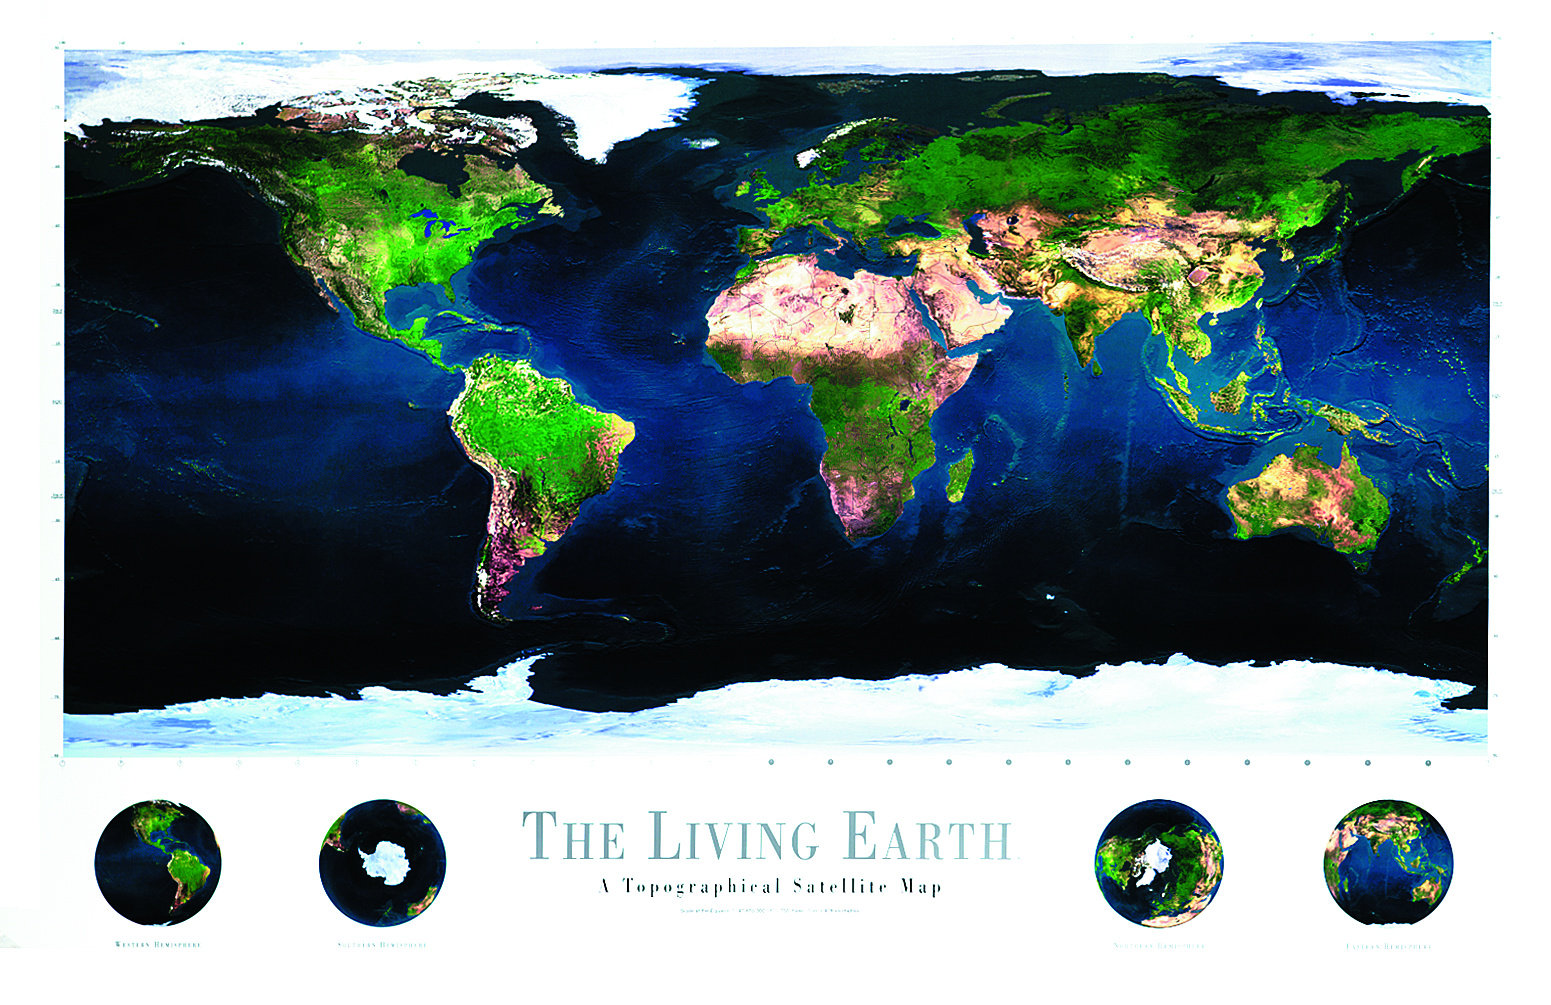 Earth Map - Living Earth Satellite Map